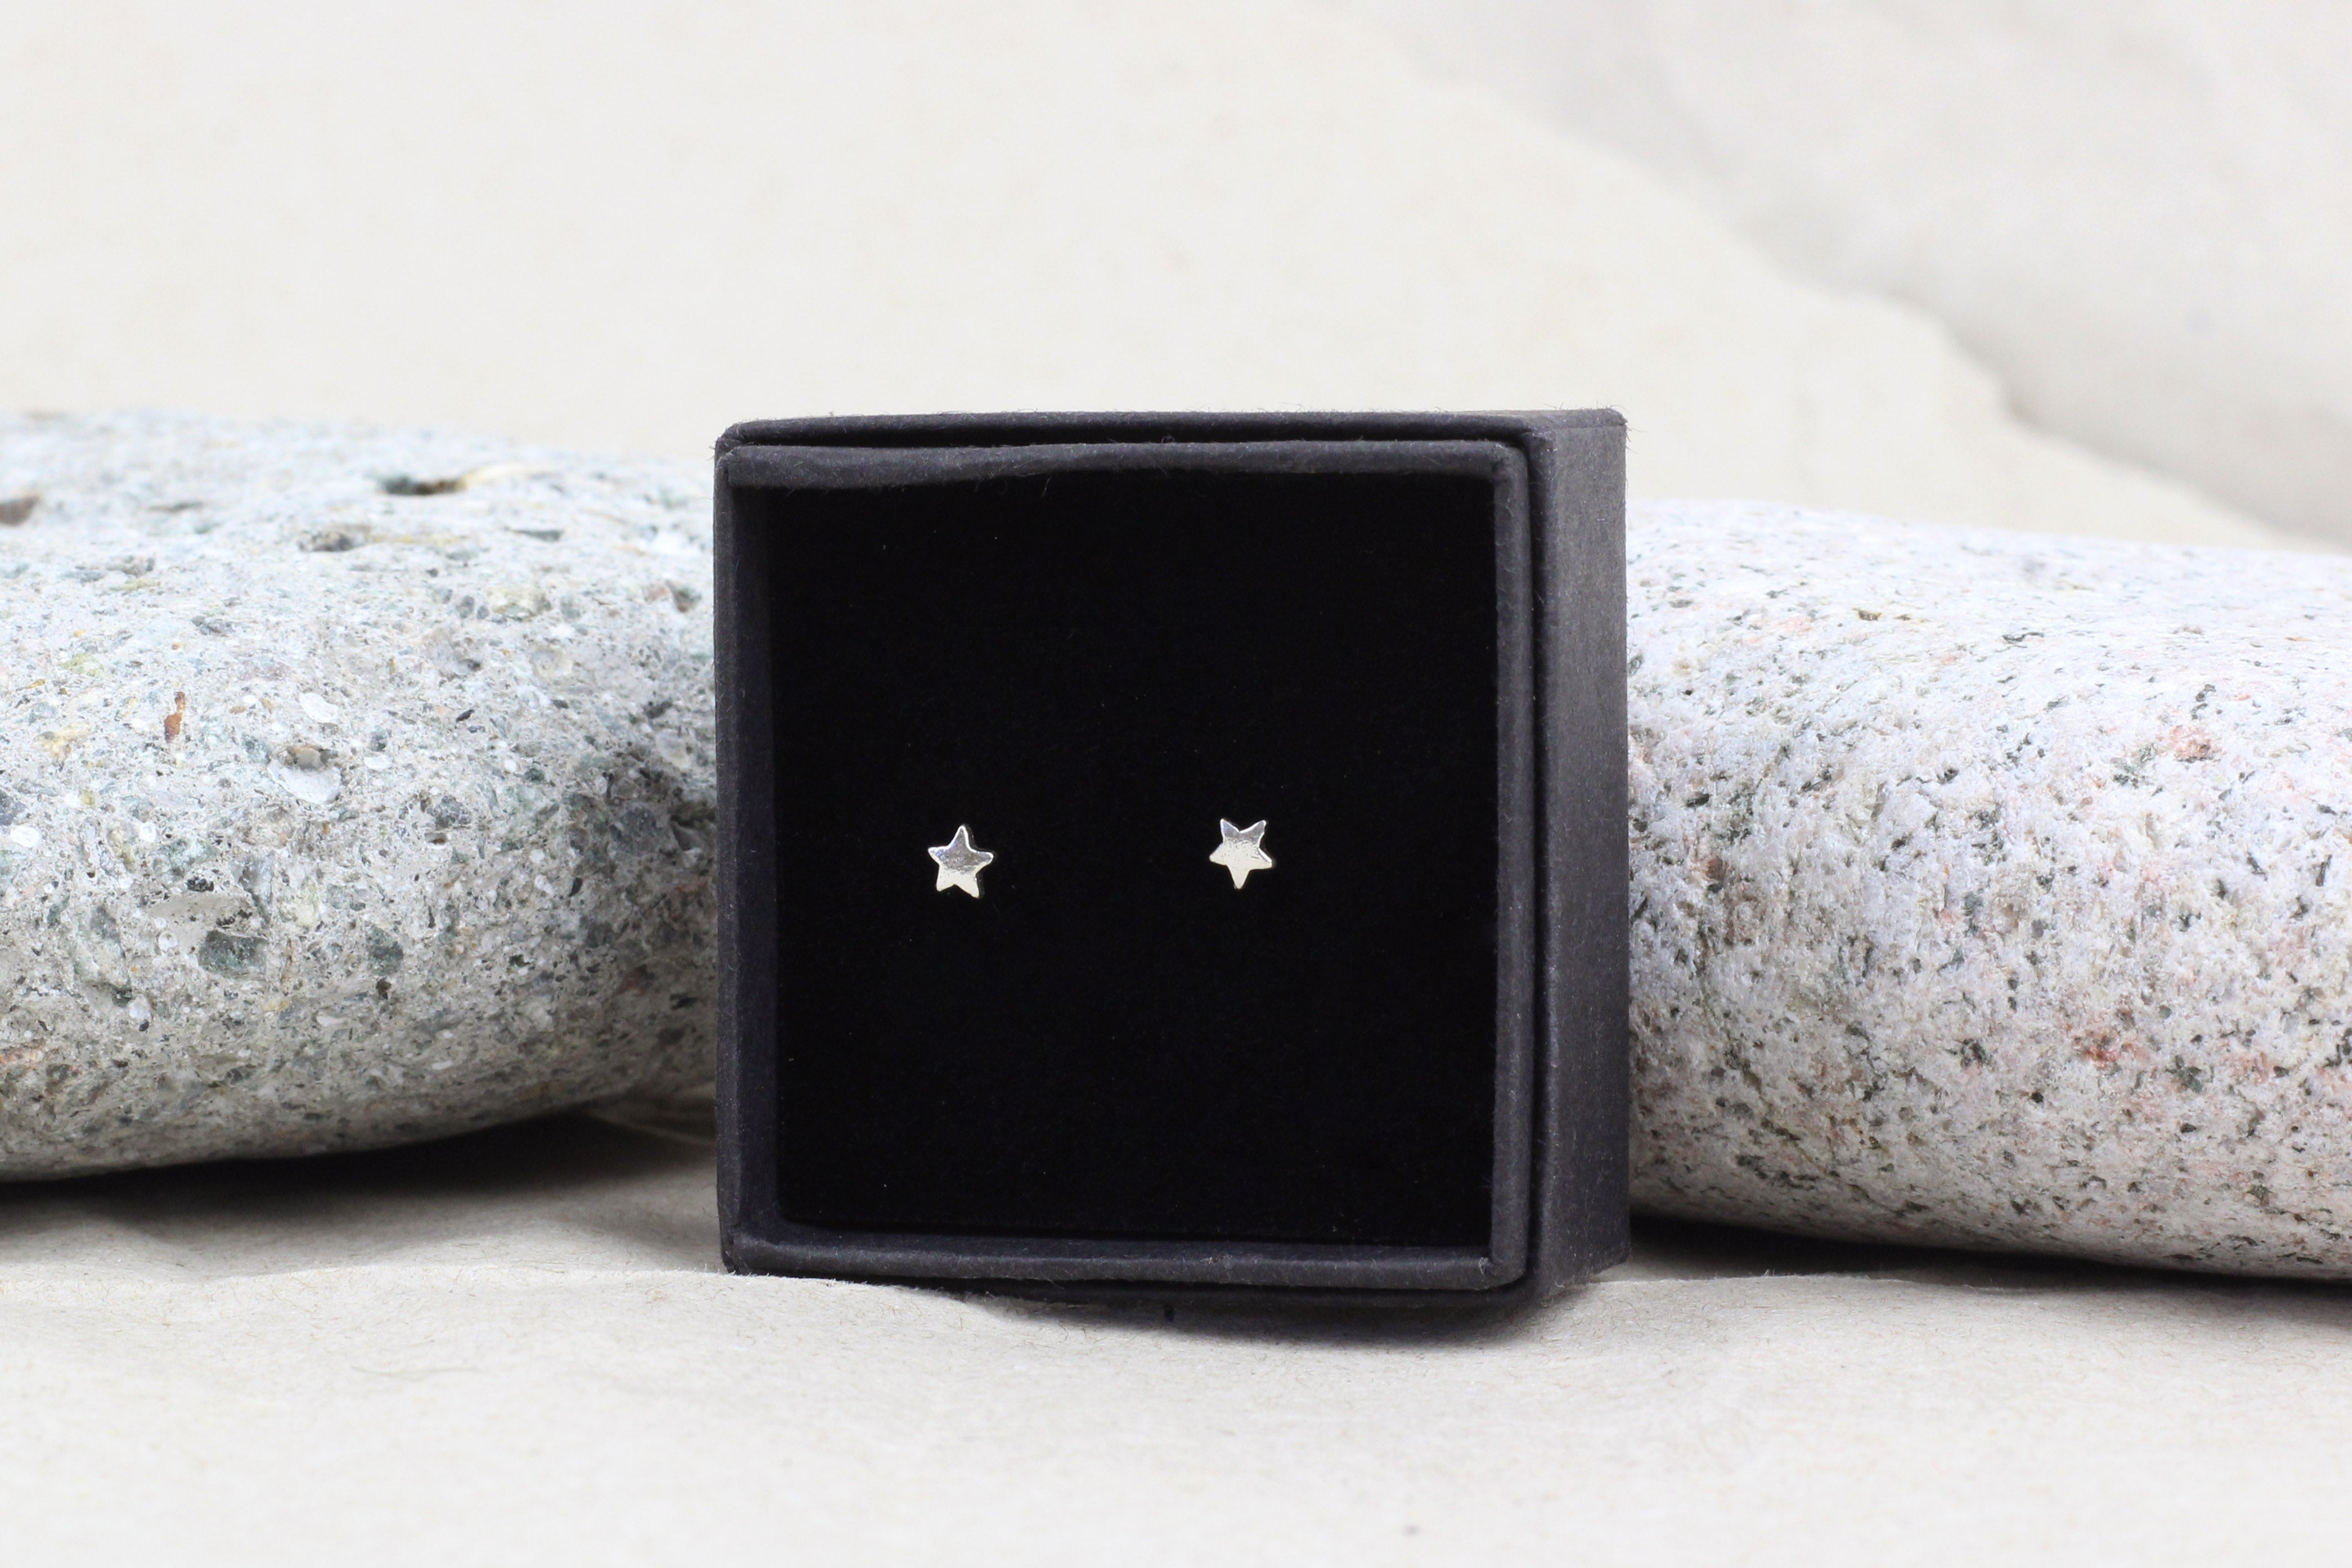 ROUND STUD EARRINGS WITH DIAMOND STARS, .07 CT TW - Howard's Jewelry Center